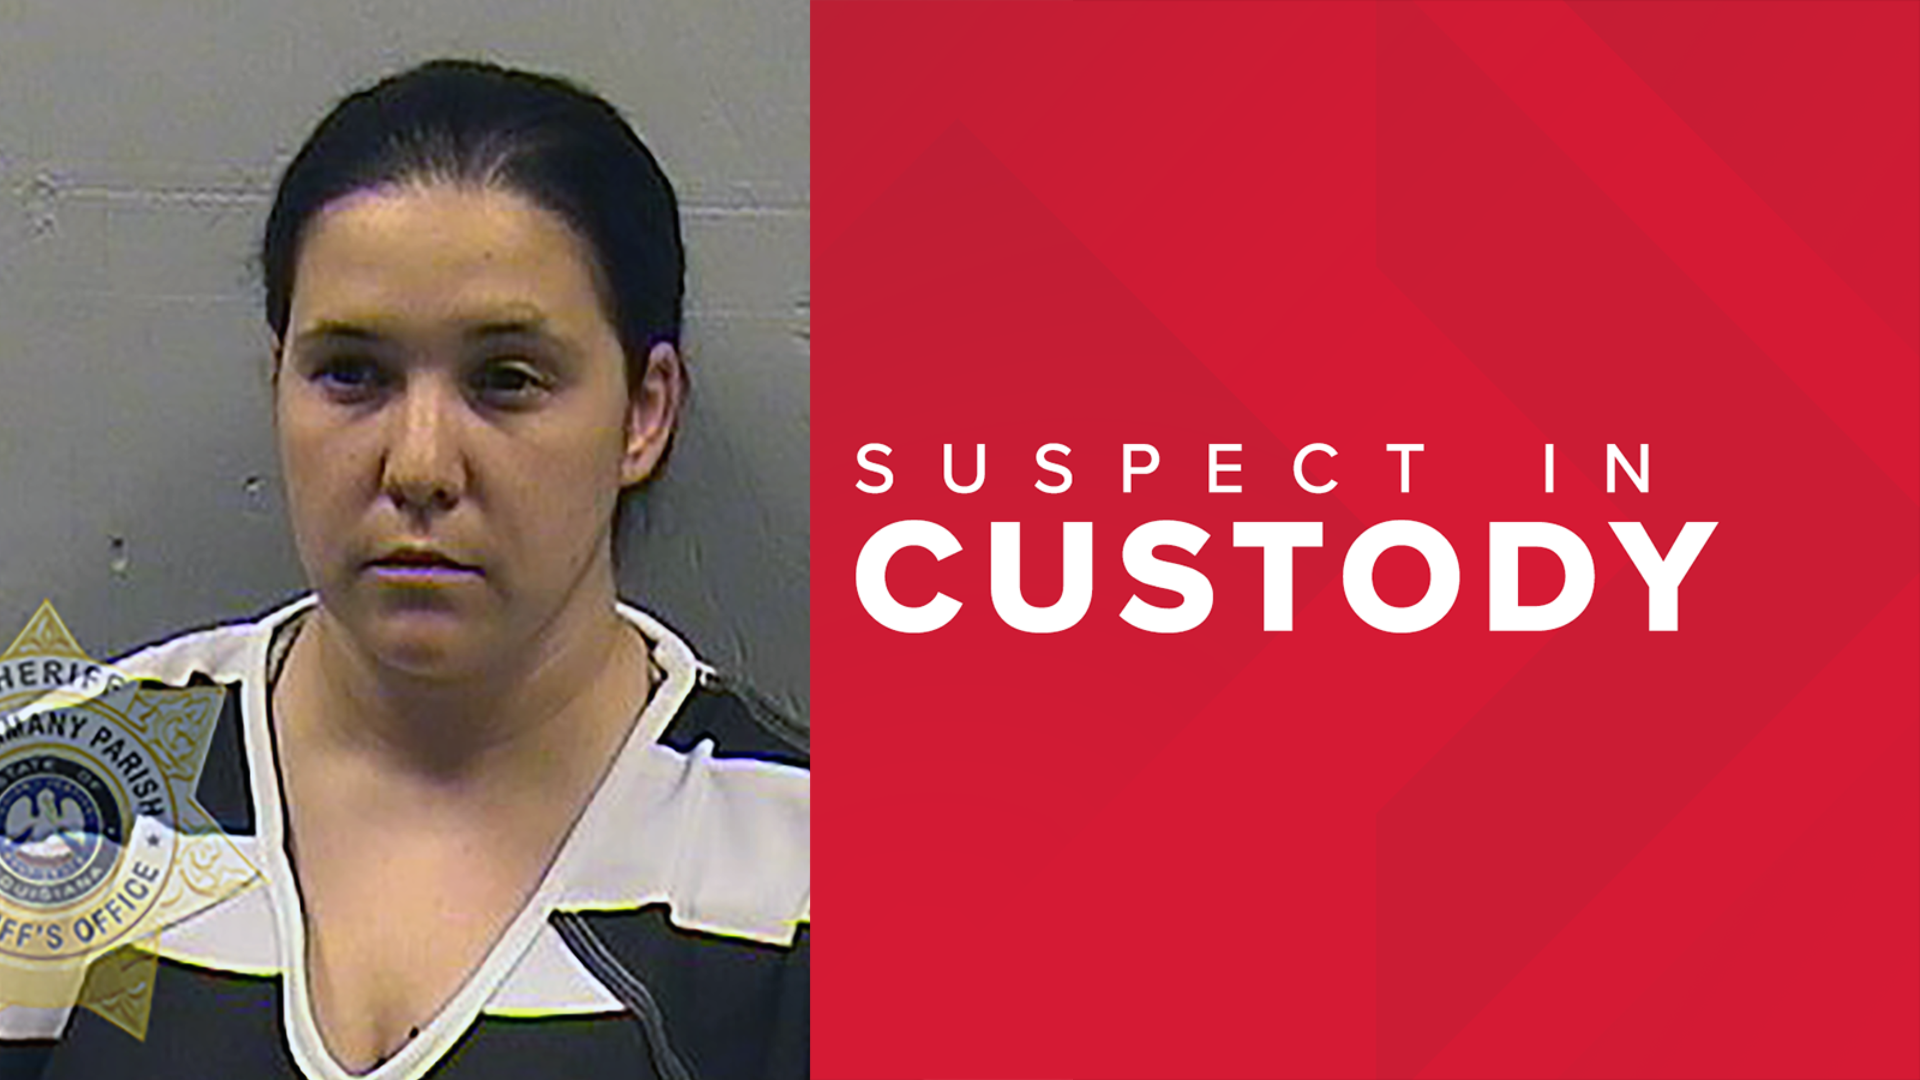 Leann Simon was booked into the St. Tammany Parish Jail Tuesday on one count of second-degree cruelty to a juvenile.